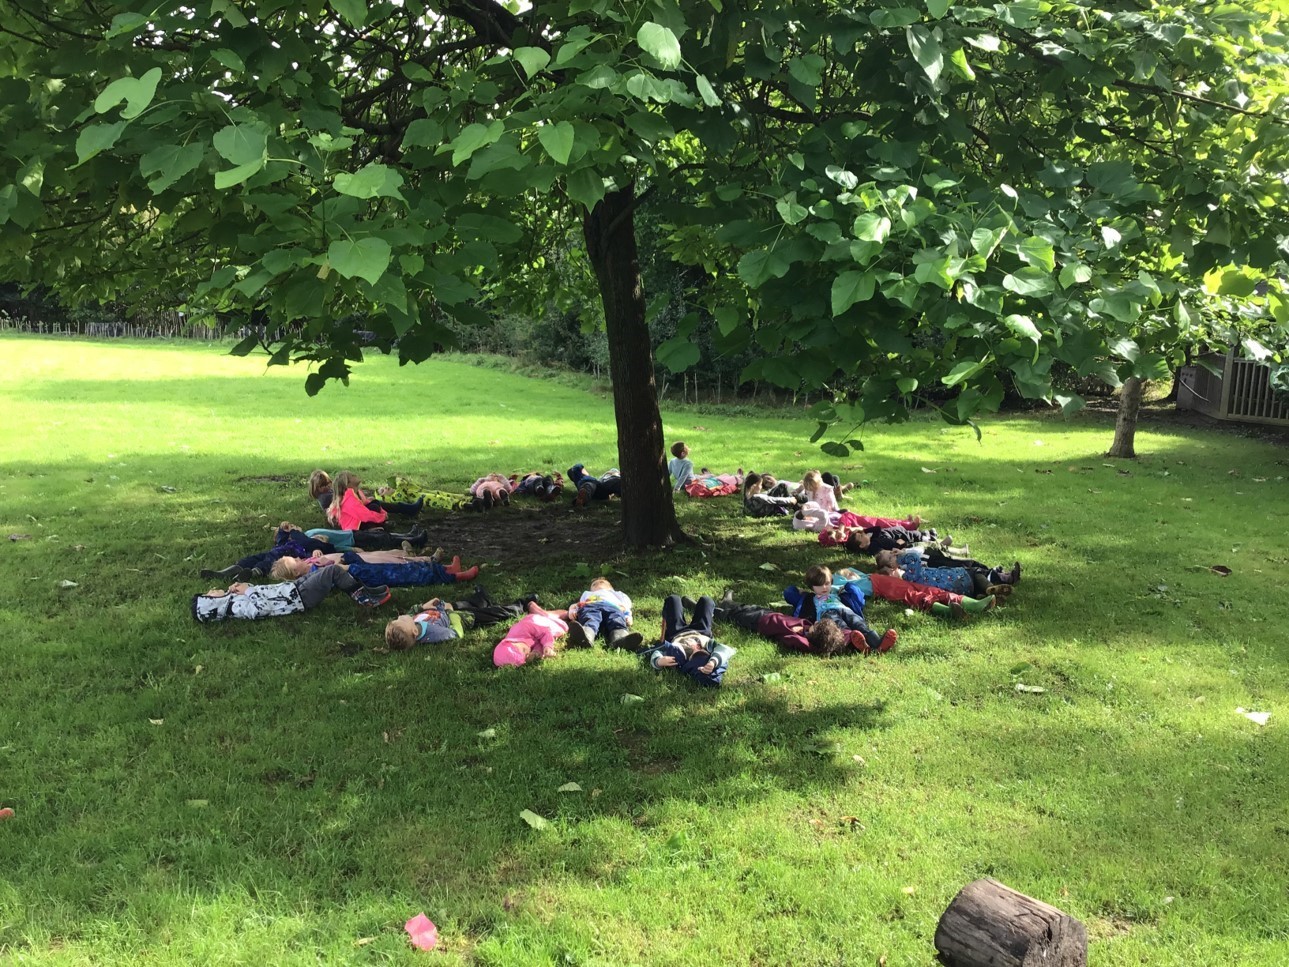 St Marys pupils bathed under the canopy of the trees to connect with nature.